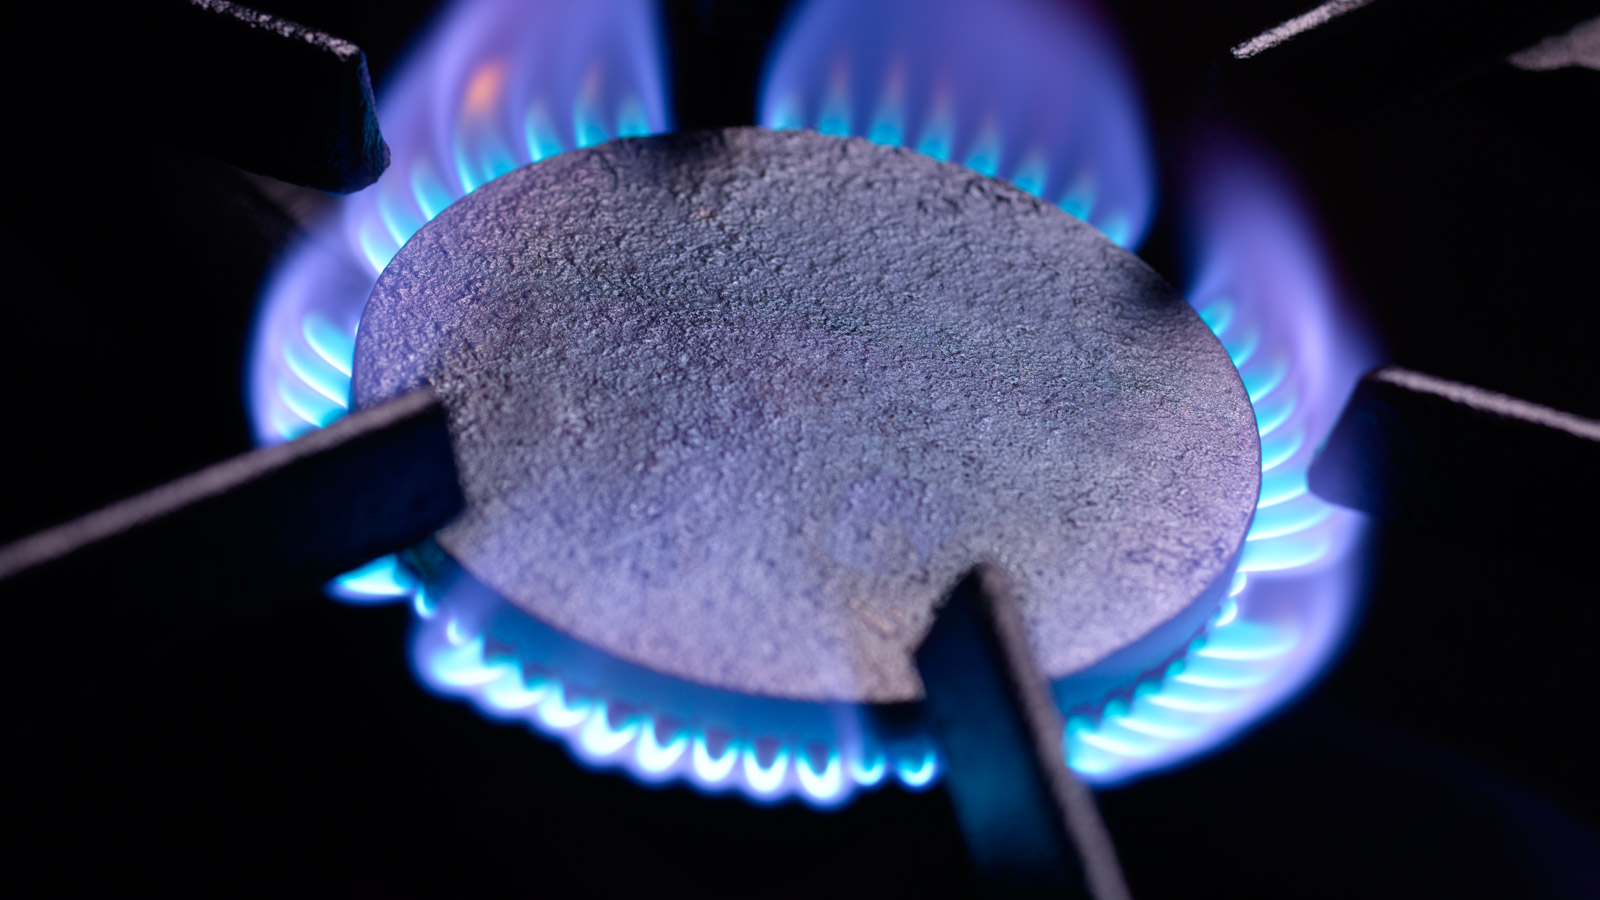 Blue flames on a gas cooker ring